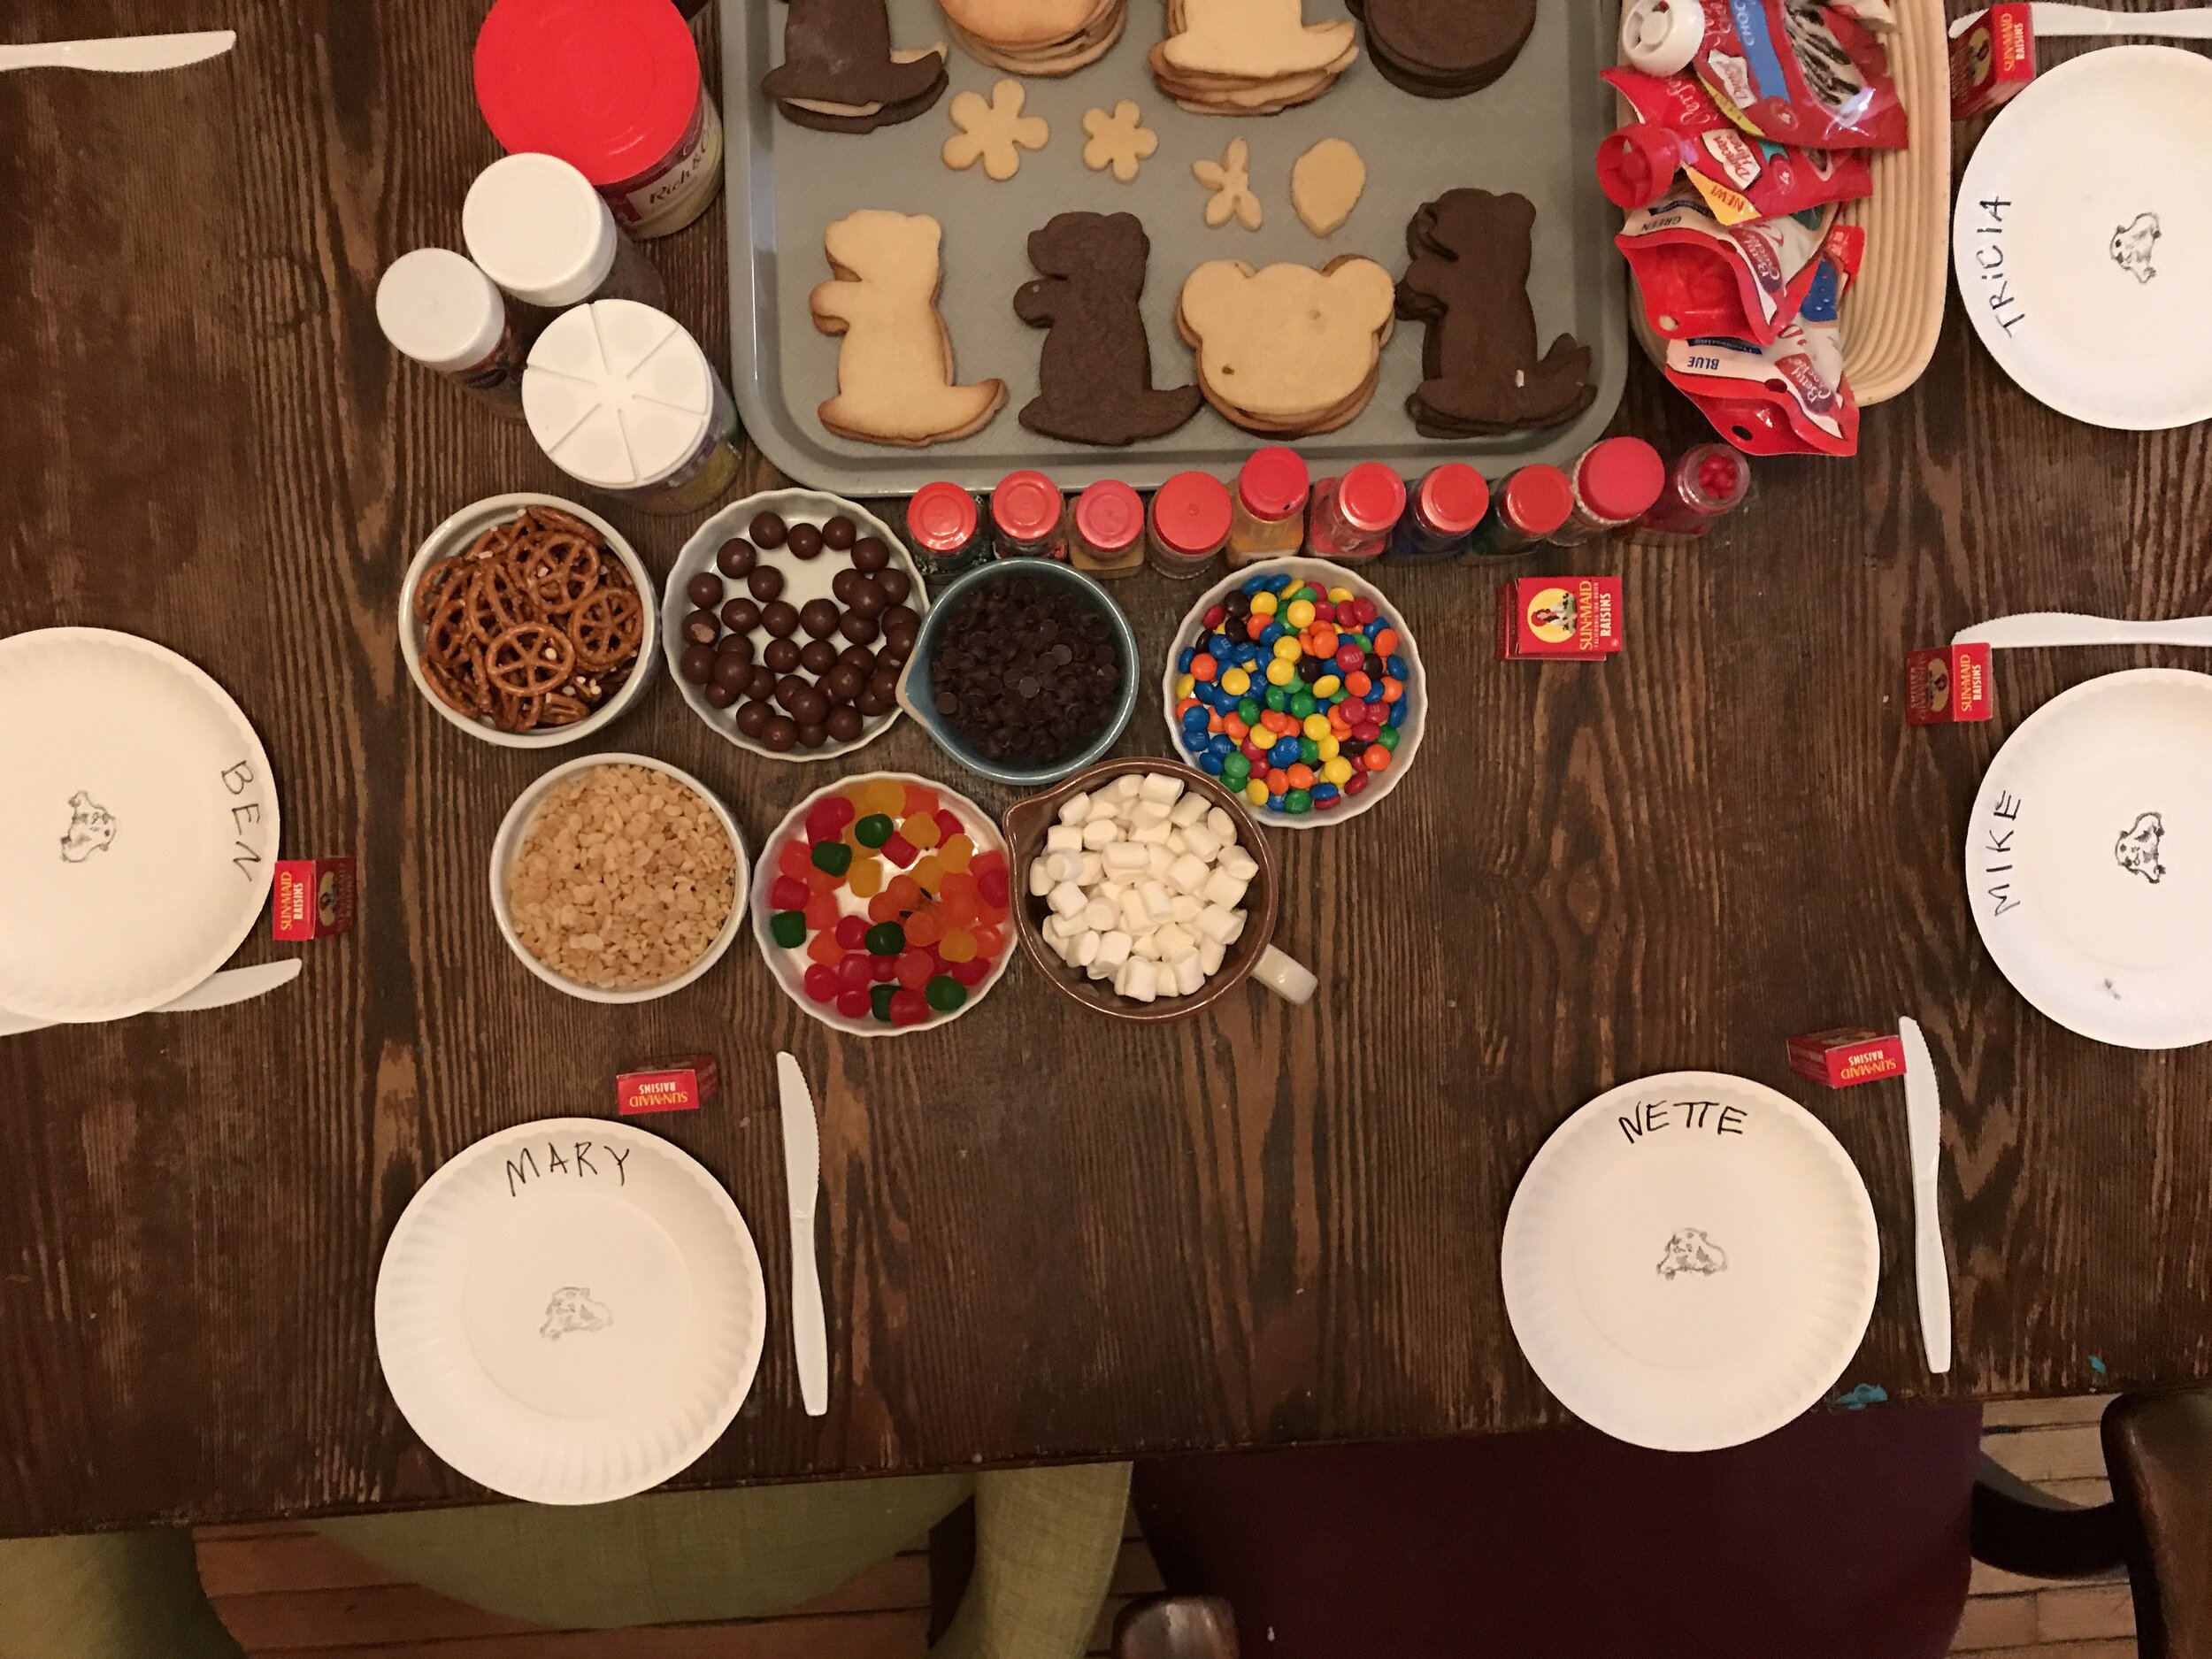  This is from the annual Groundhog Day cookie decorating party.  